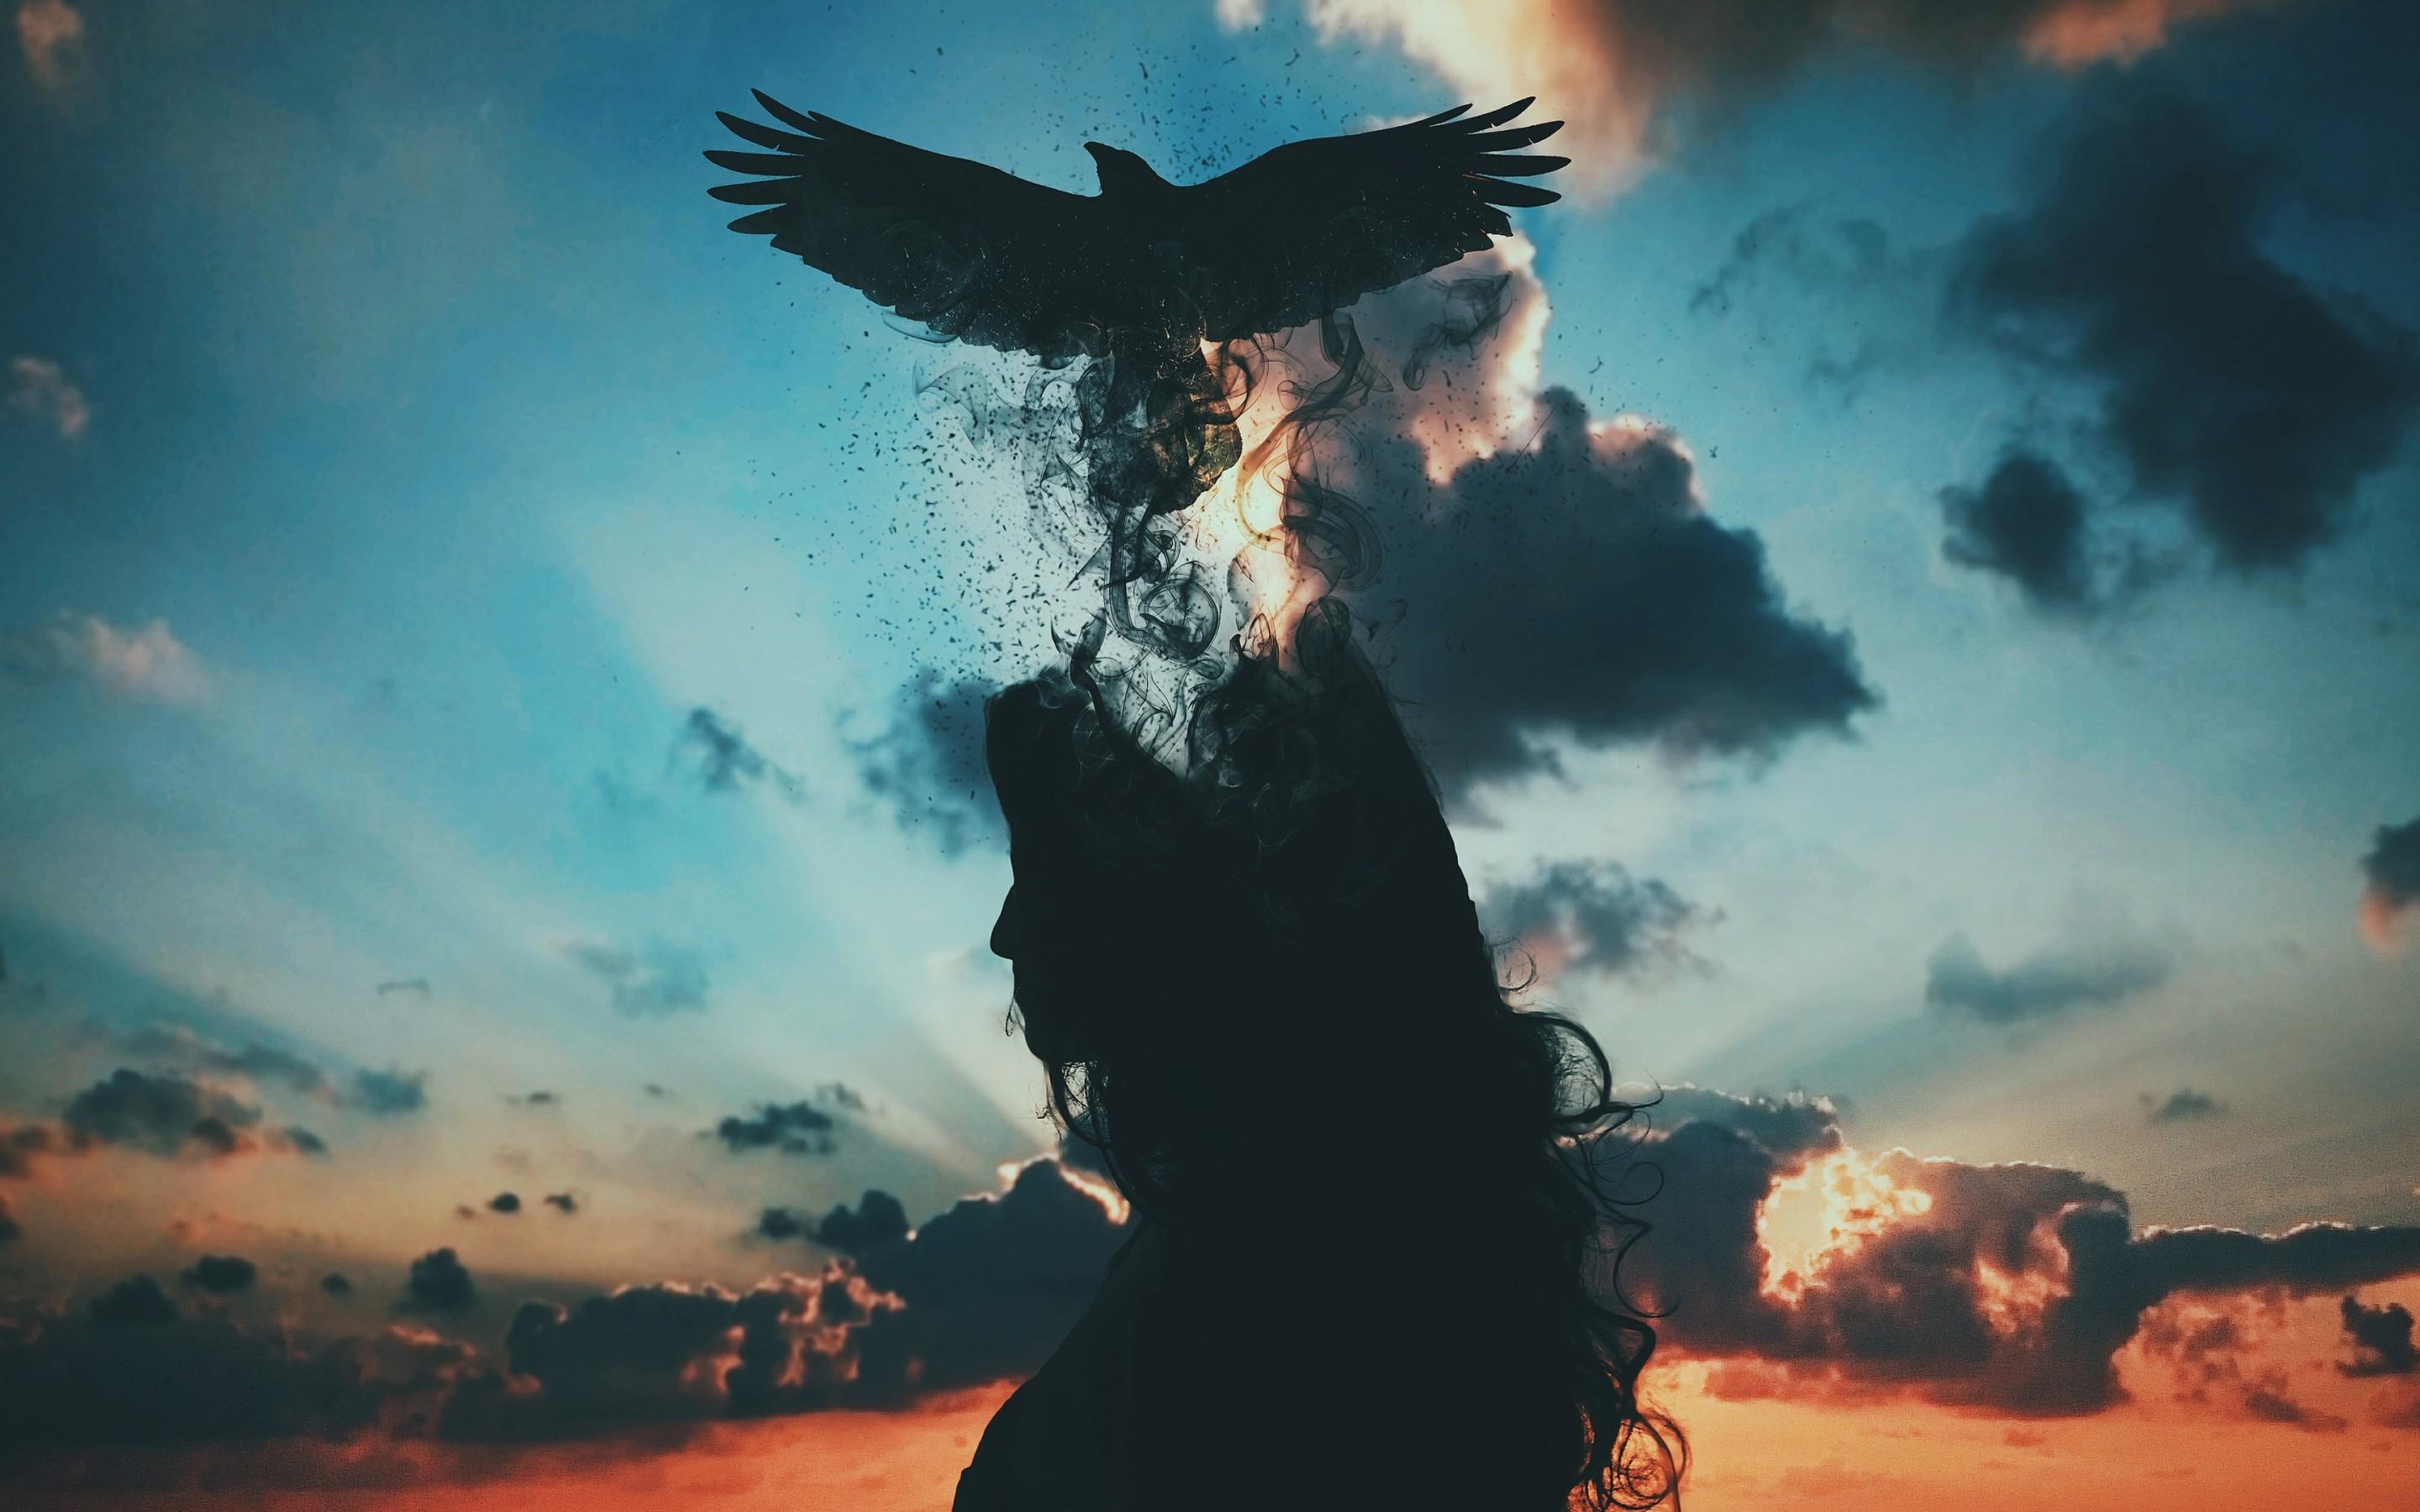 Download 2880x1800 Bird And Woman, Surreal, Photo Manipulation